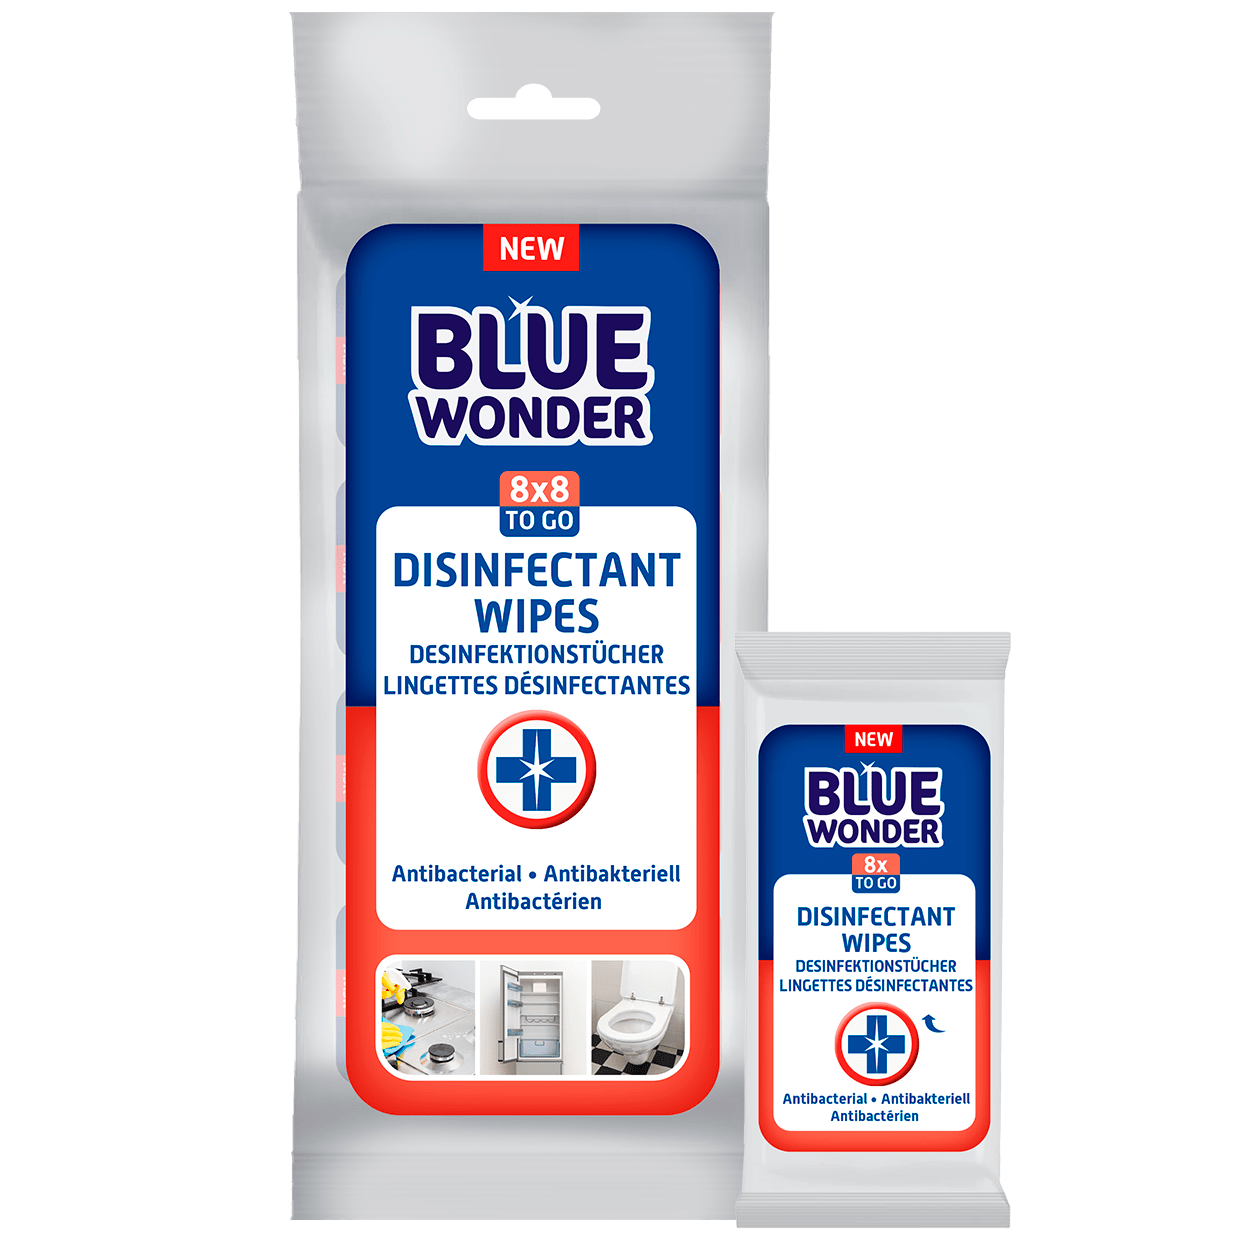 Blue Wonder Disinfectant Wipes, ideal for quick daily cleans and unique because they clean and disinfect at the same time. Blue Wonder Disinfectant Wipes are suitable for daily cleaning of counter tops, the toilet, the bathroom, door handles, tables, worktops, the fridge, toys and much more. Chlorine-free. Ready to use. Please note: test the wipes on an inconspicuous area before use. Reseal the pack carefully after use. The wipes can be thrown away with your household waste.